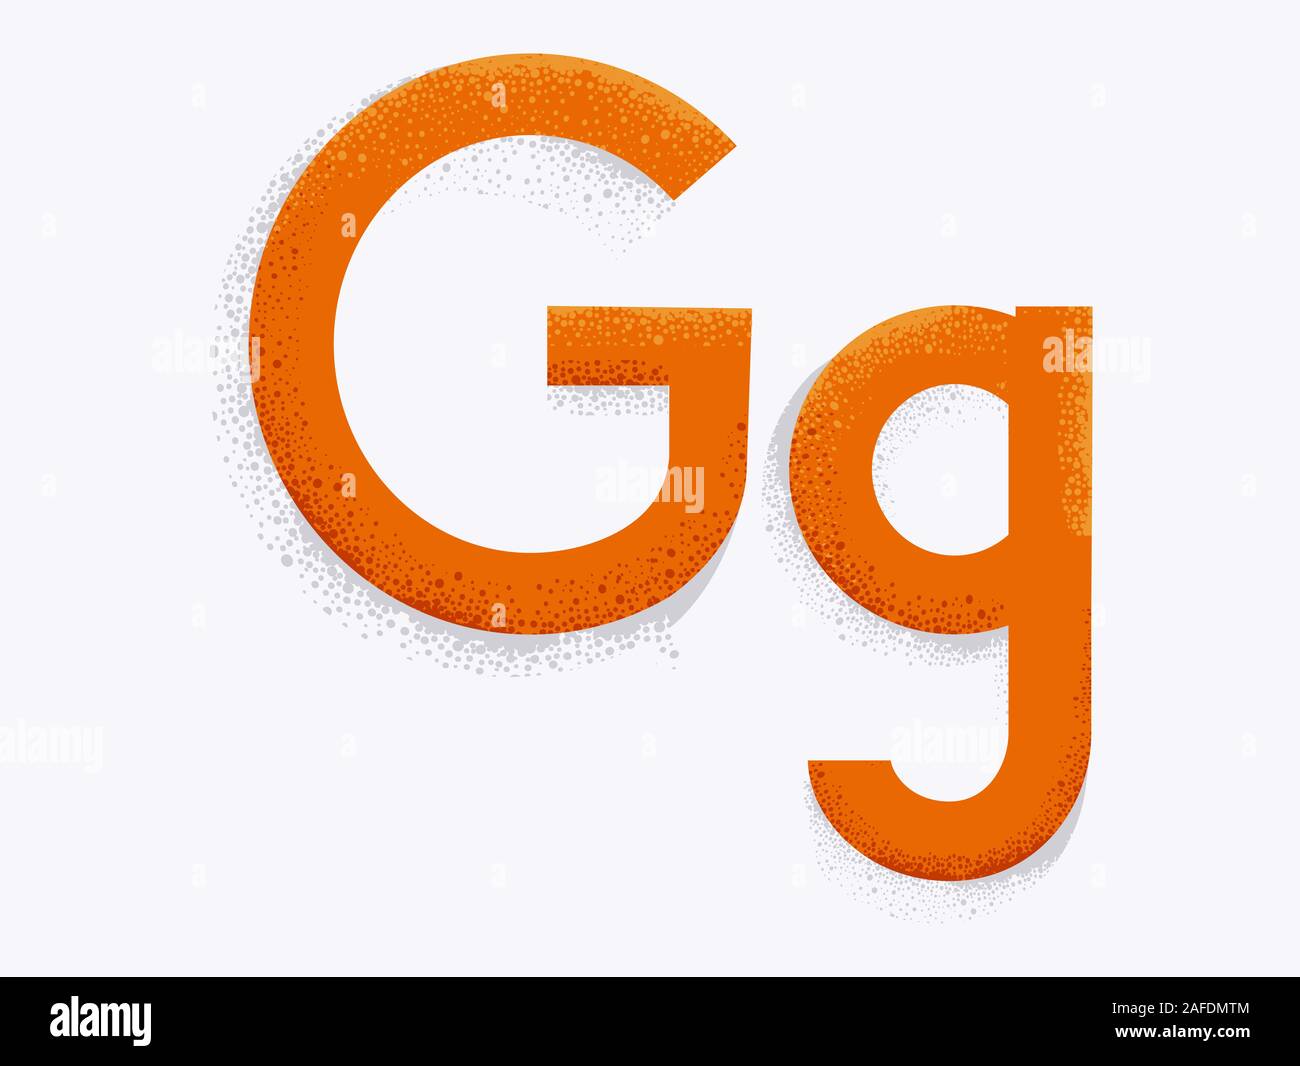 Illustration of Decorative Alphabet with Capital and Small Letter G and Dust Particle Effect Stock Photo